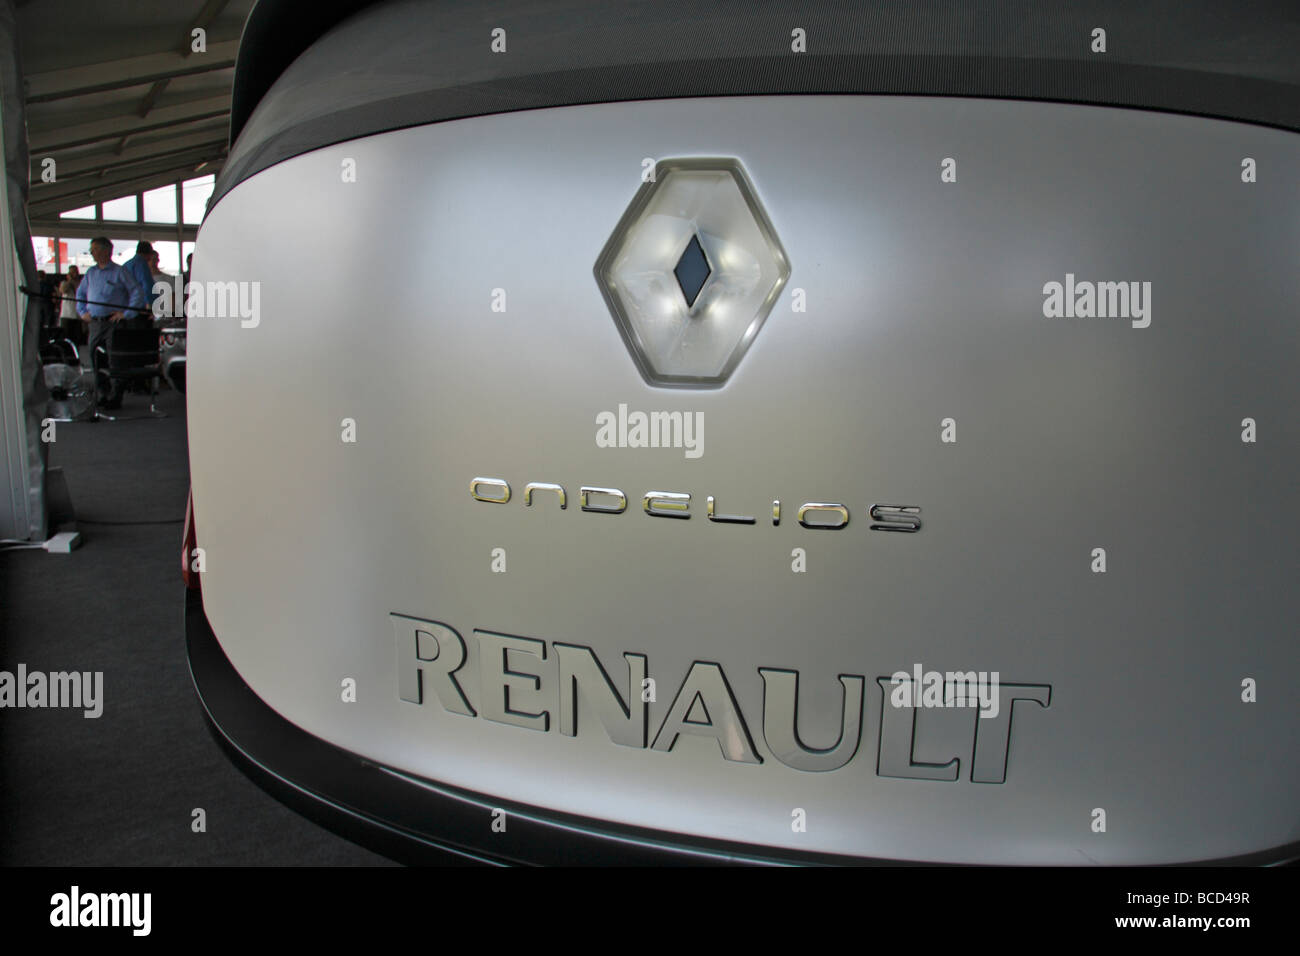 The curved rear end of the Renault Ondelios concept car at the Goodwood Festival of Speed, July 2009. Stock Photo